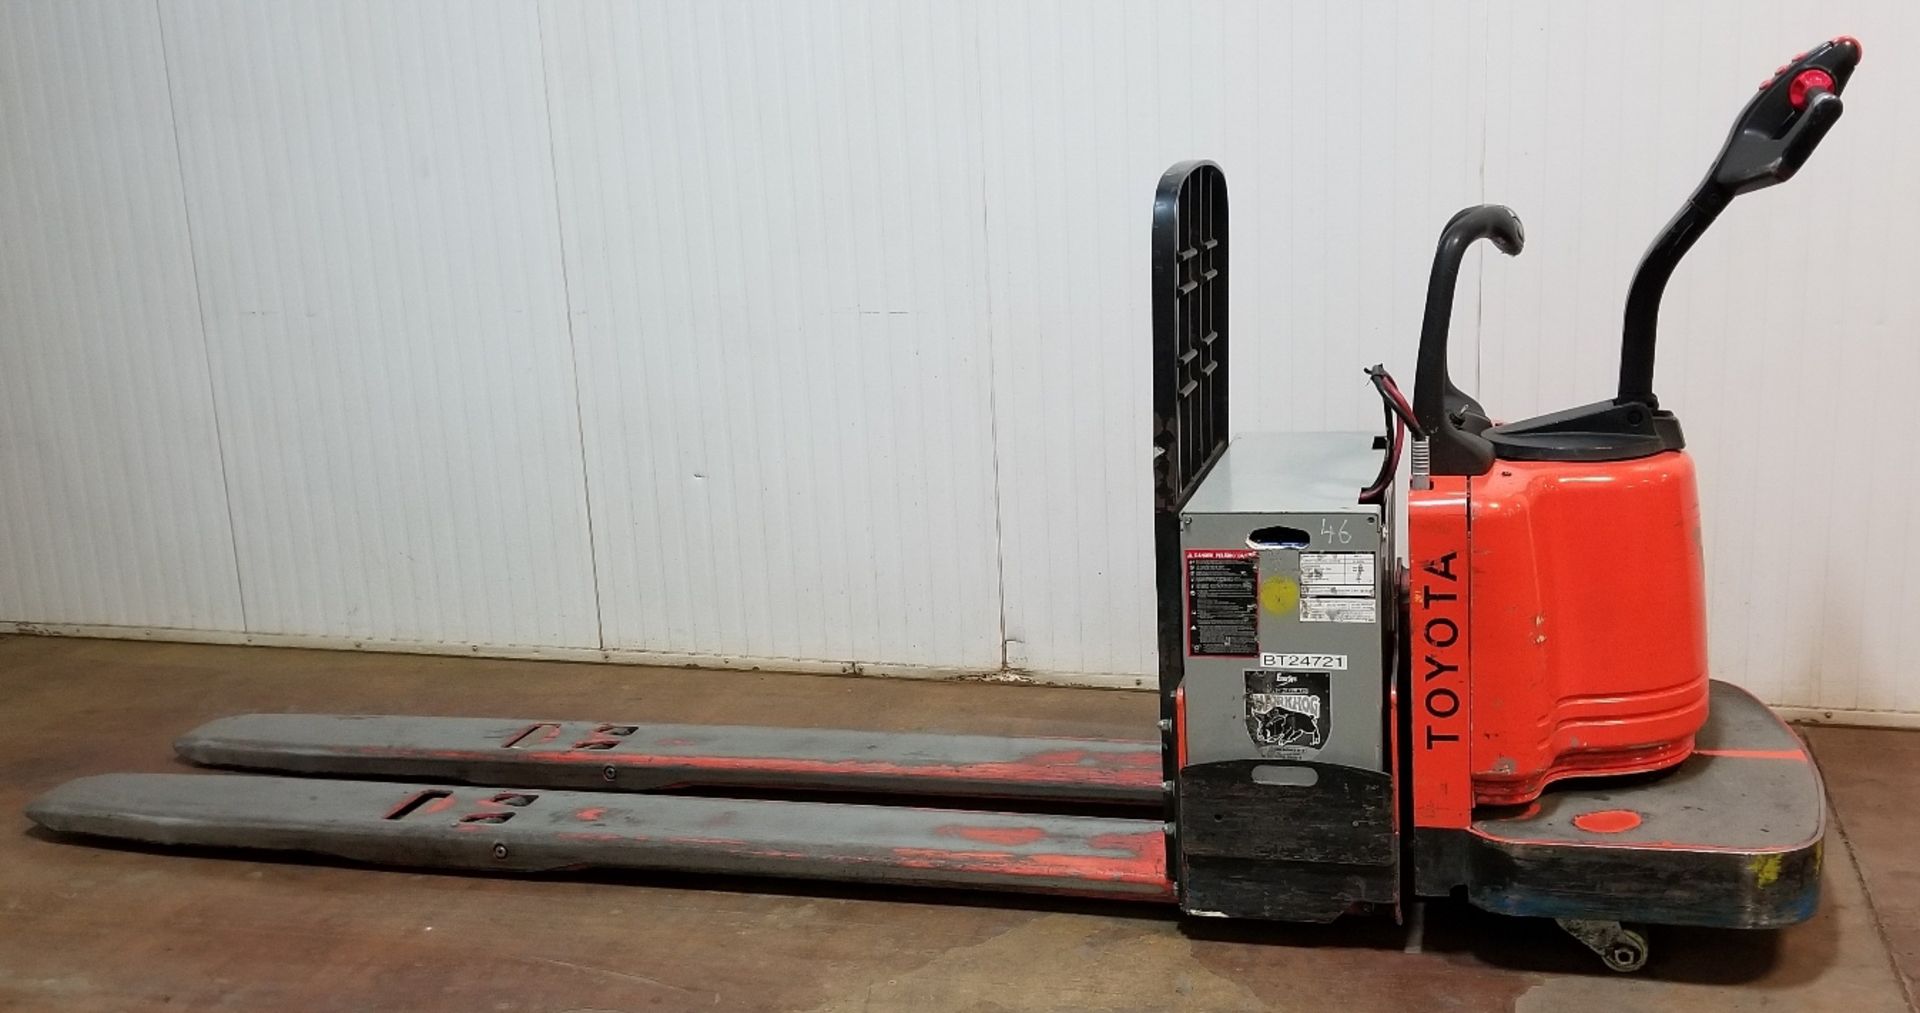 TOYOTA (2011) 7HBE30 6,000 LB. CAPACITY 24V RIDE-ON ELECTRIC PALLET TRUCK WITH 6,620 HOURS (RECORDED